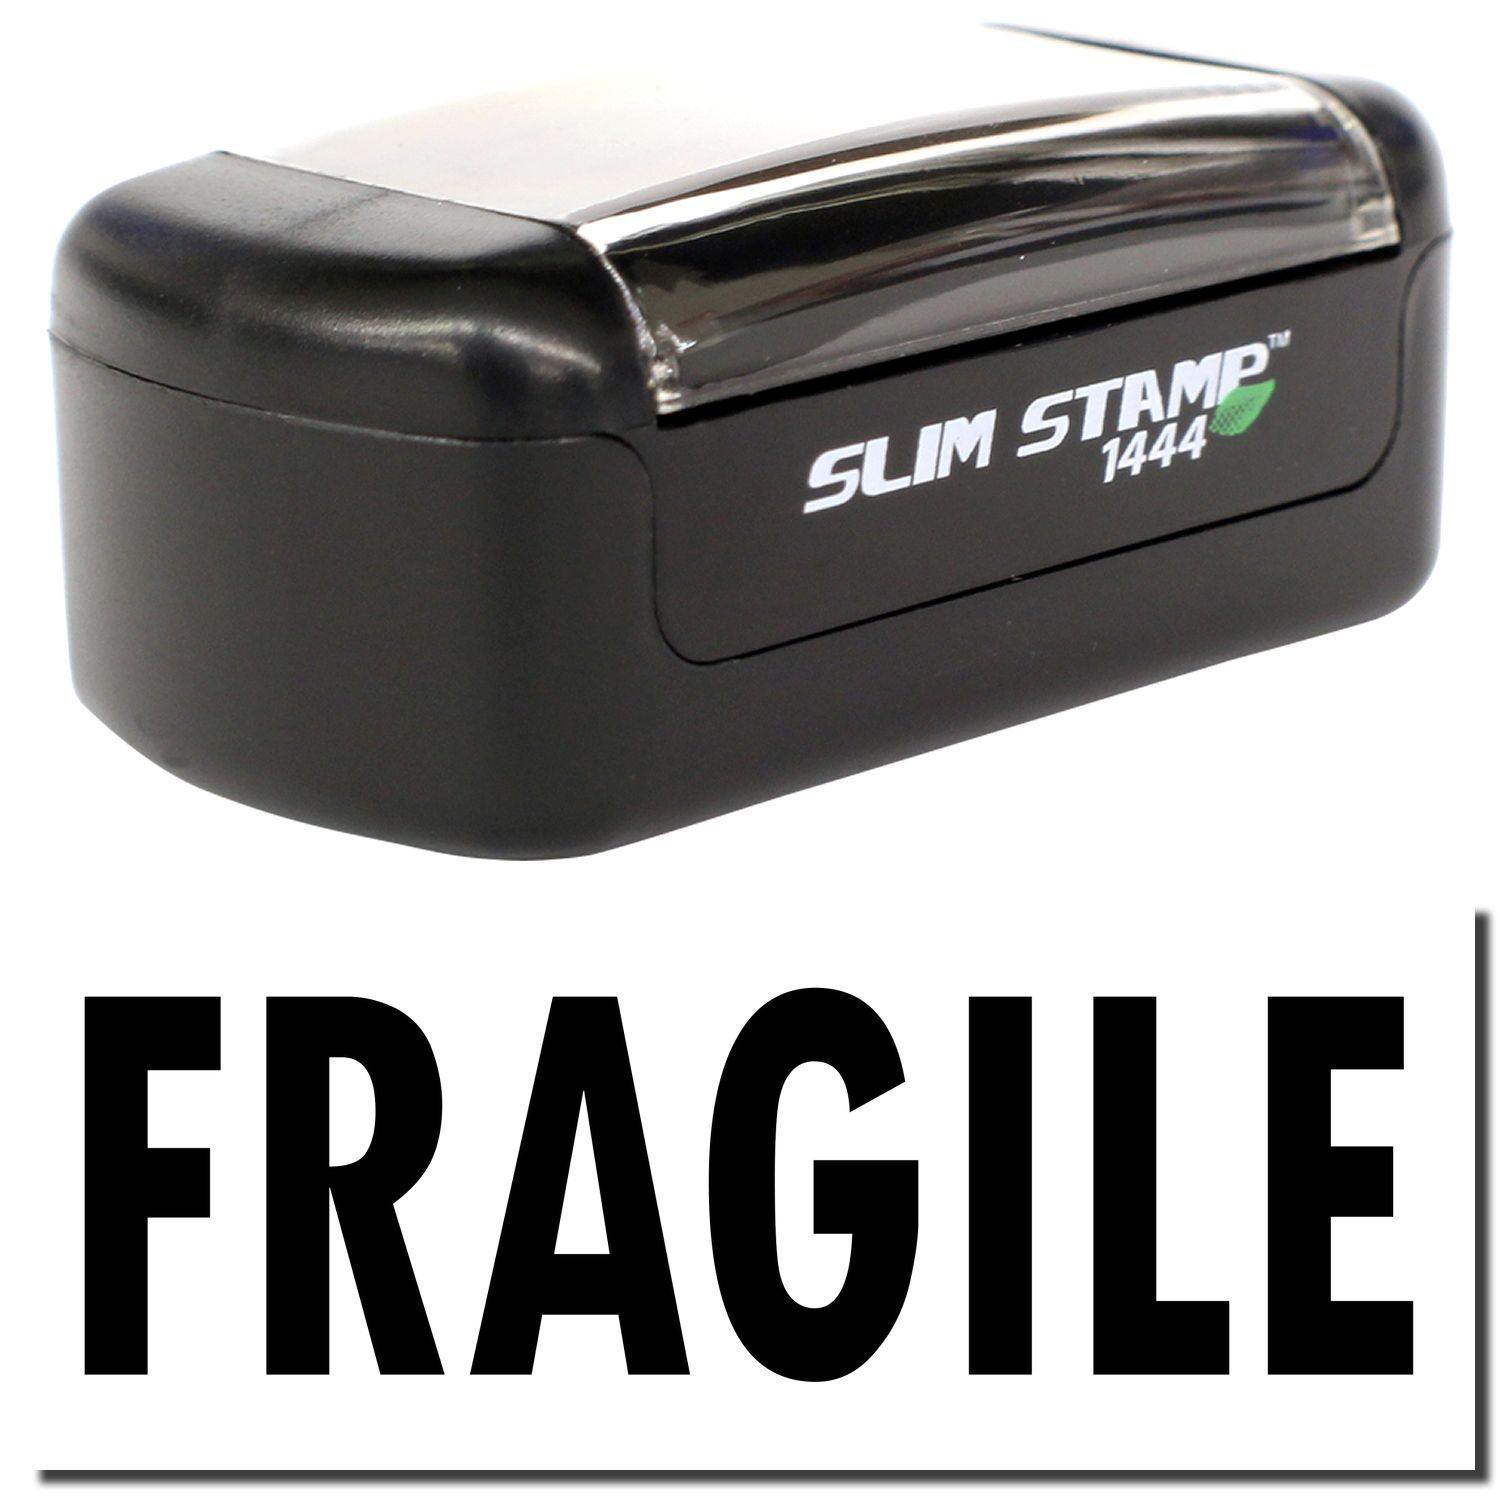 A stock office pre-inked stamp with a stamped image showing how the text "FRAGILE" is displayed after stamping.